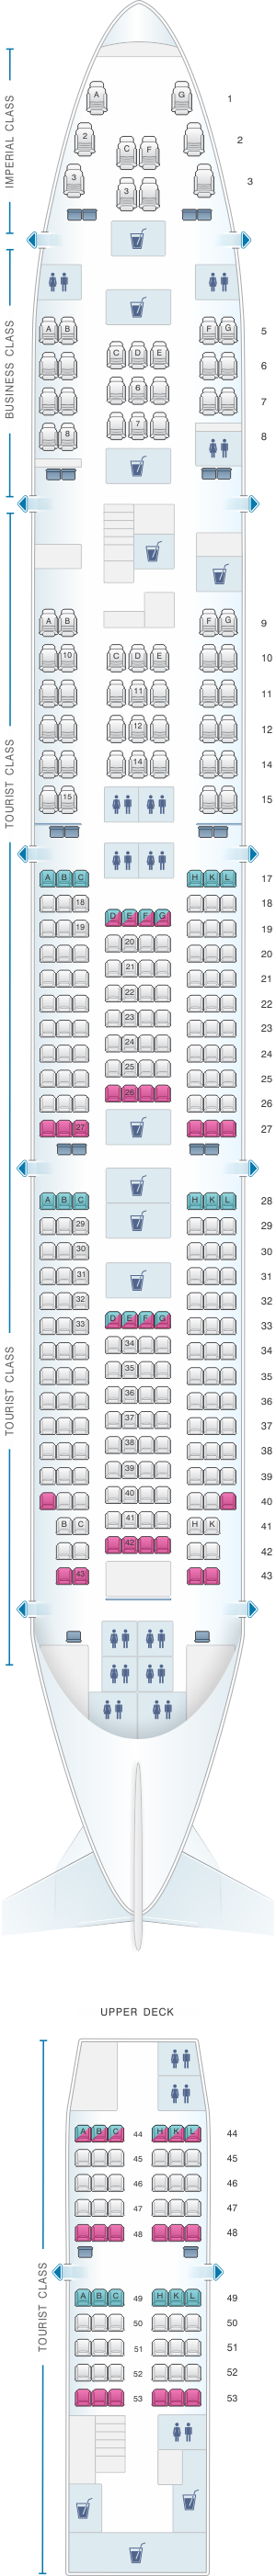 Seat map for Transaero Airlines Boeing B747 400 Config. 6